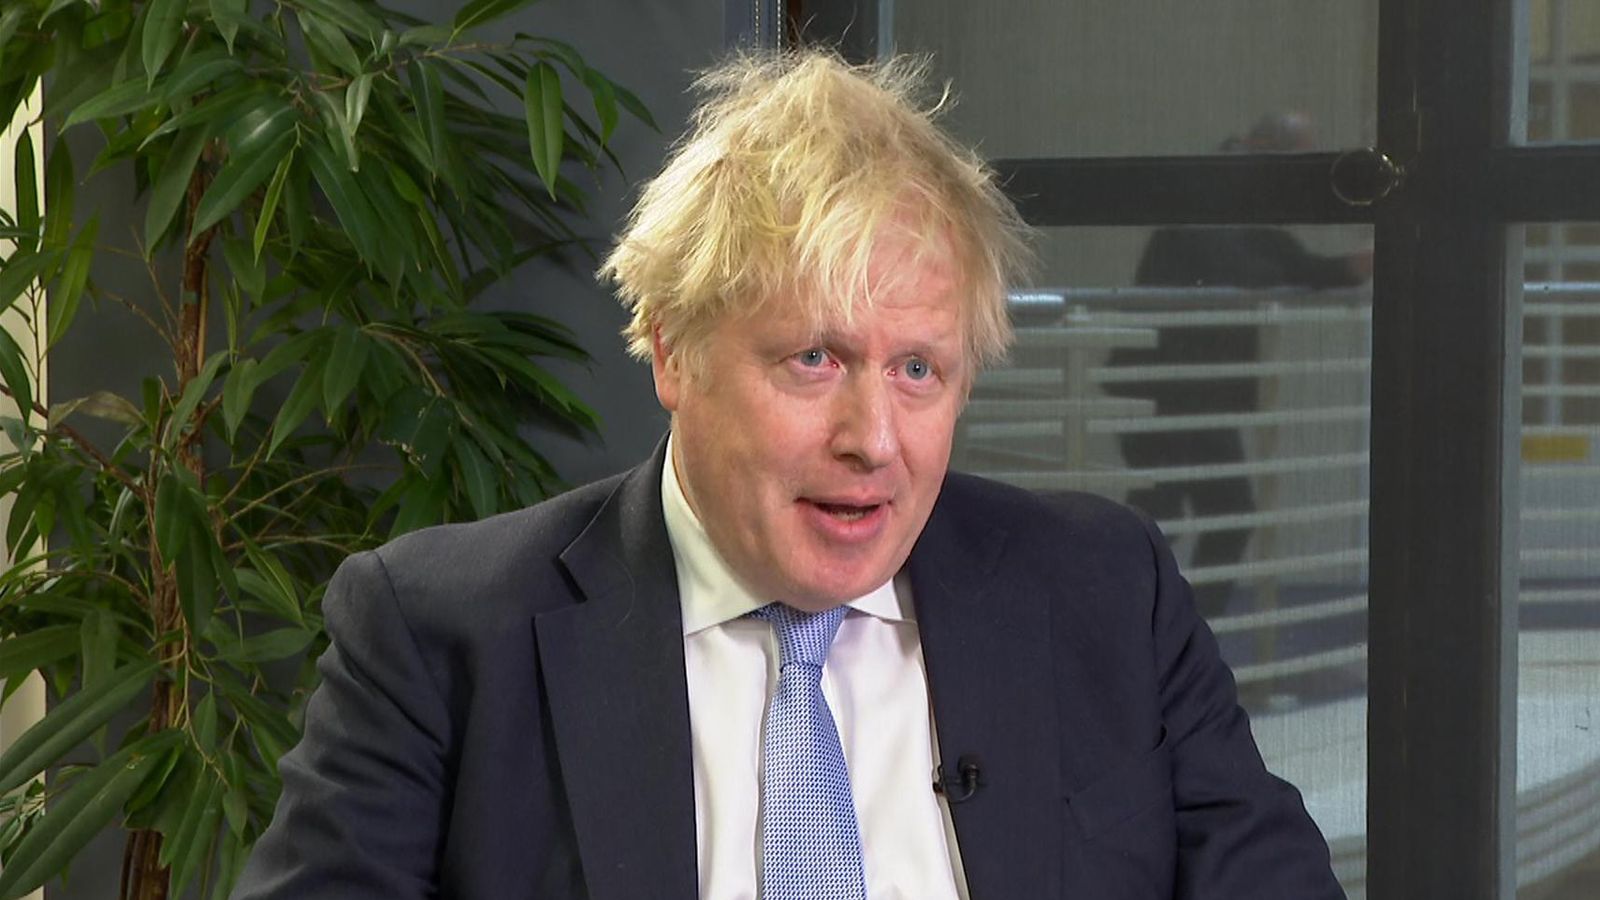 Boris Johnson believed 'implicitly' he was following COVID rules during lockdown gatherings